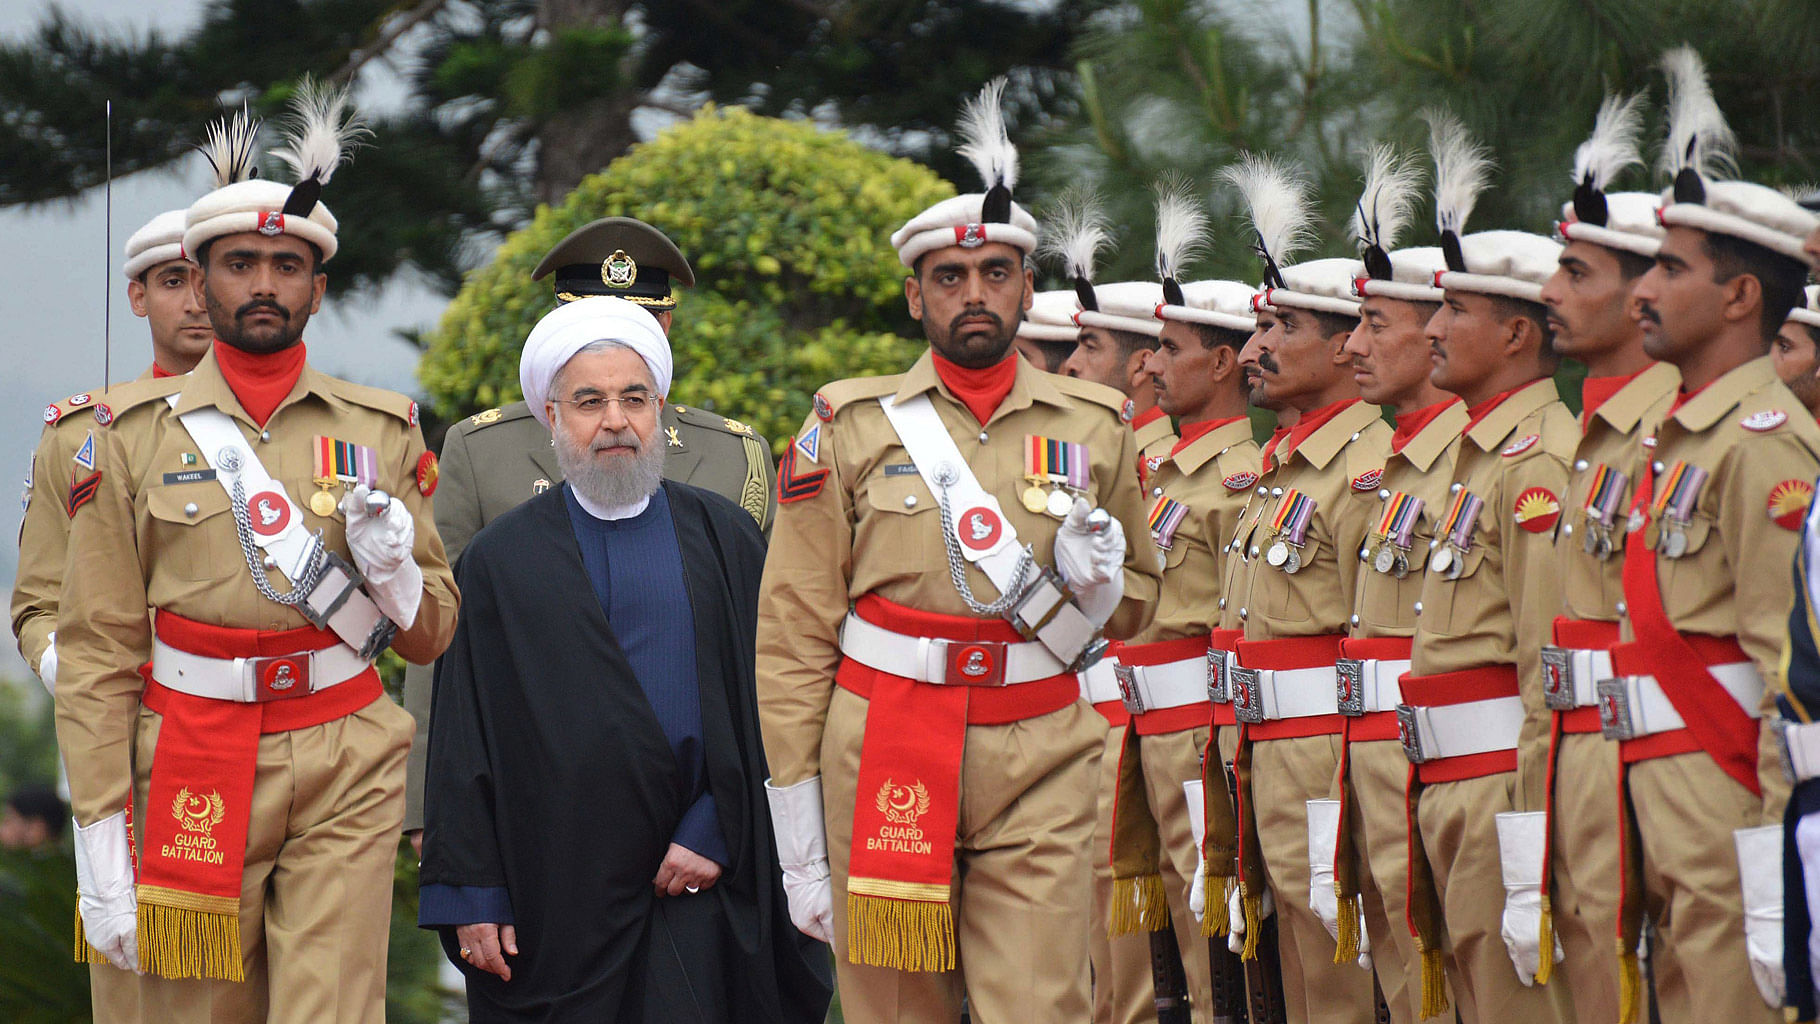 

Iranian President Hassan Rouhani, second from left, reviews the guard of honour in Islamabad, Pakistan, March 25, 2016. (Photo: AP)